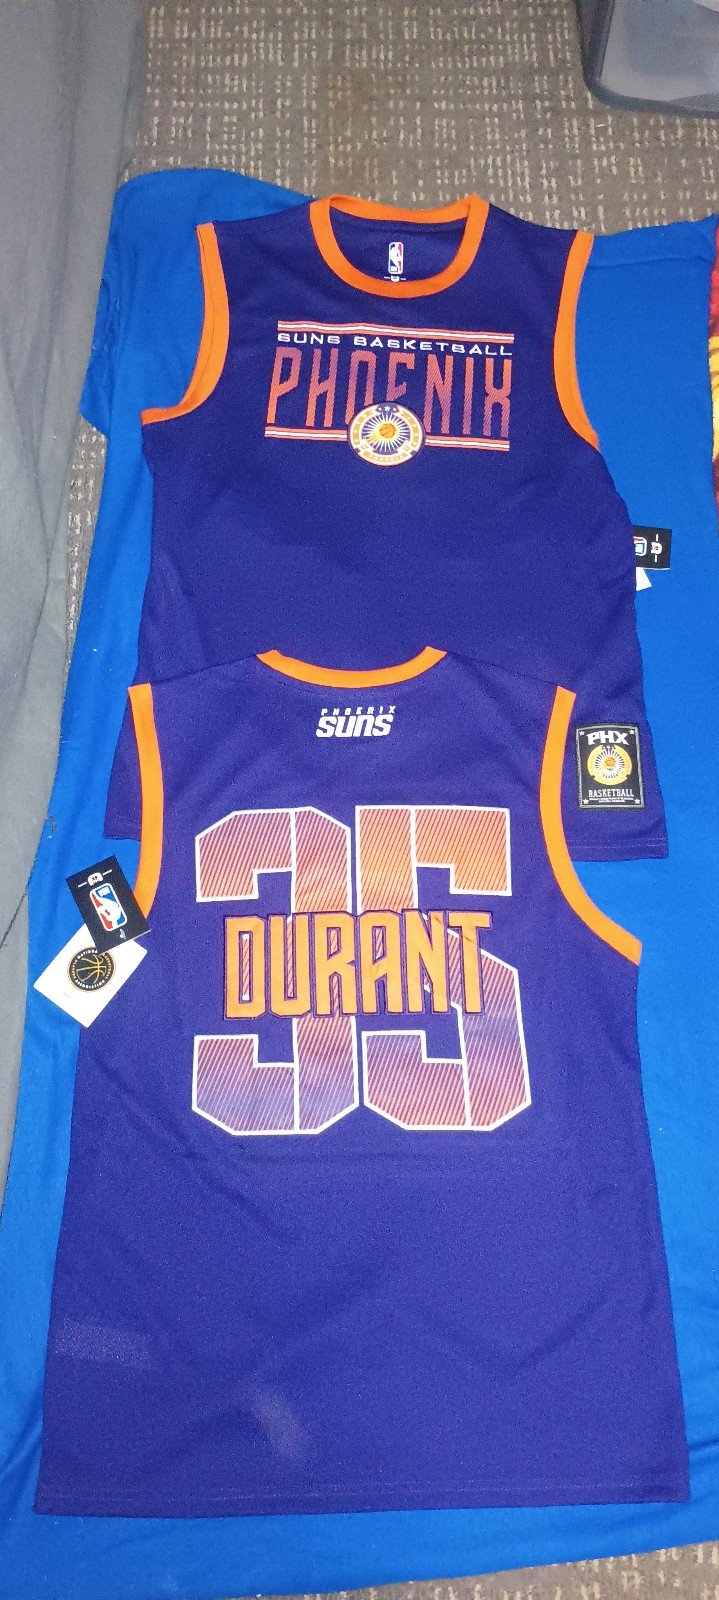 Kevin Durant jersey aZQcsjsO9